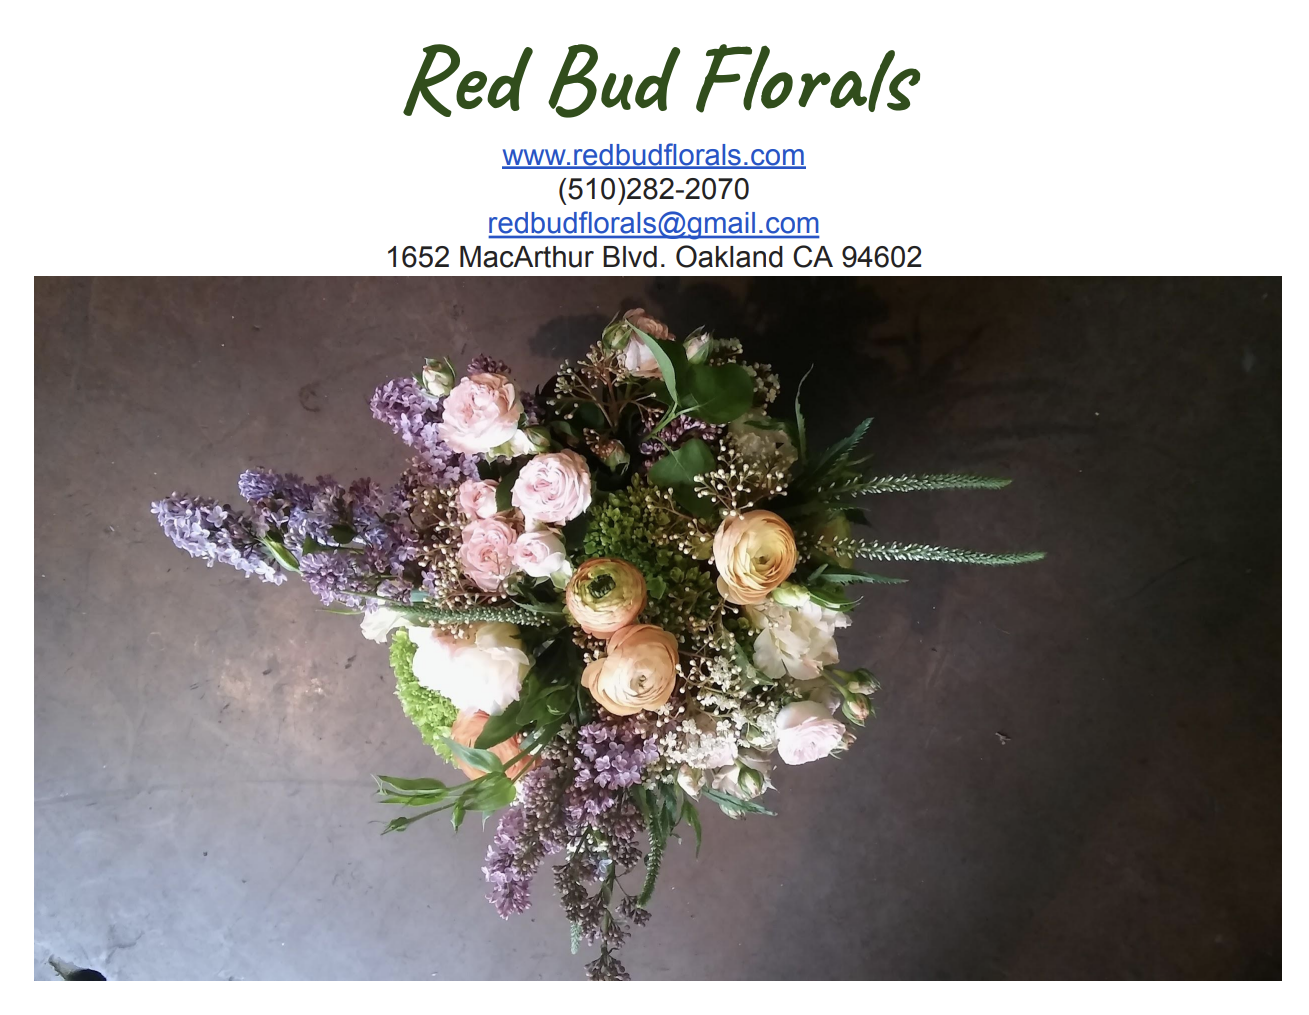 Ad for Red Bud Florals